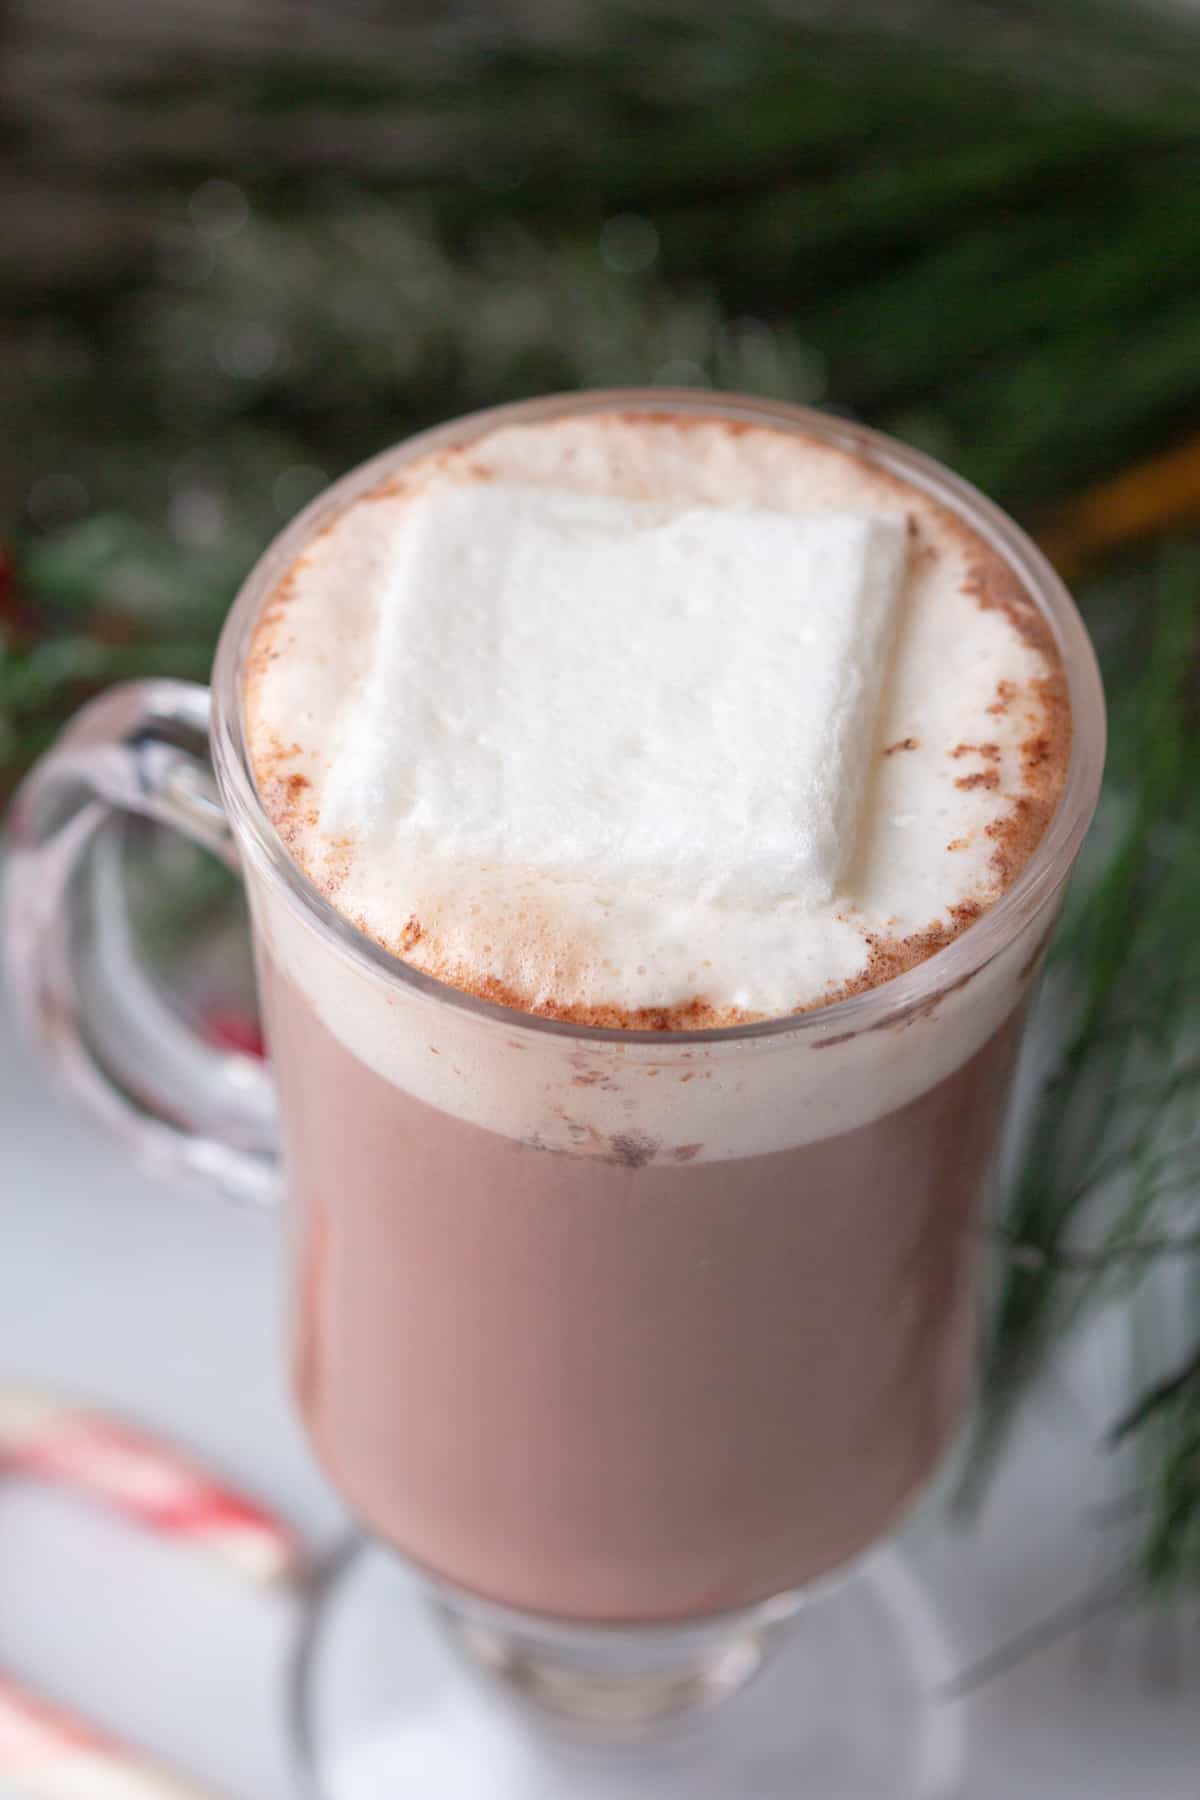 A cup of hot chocolate with marshmallows and candy canes.